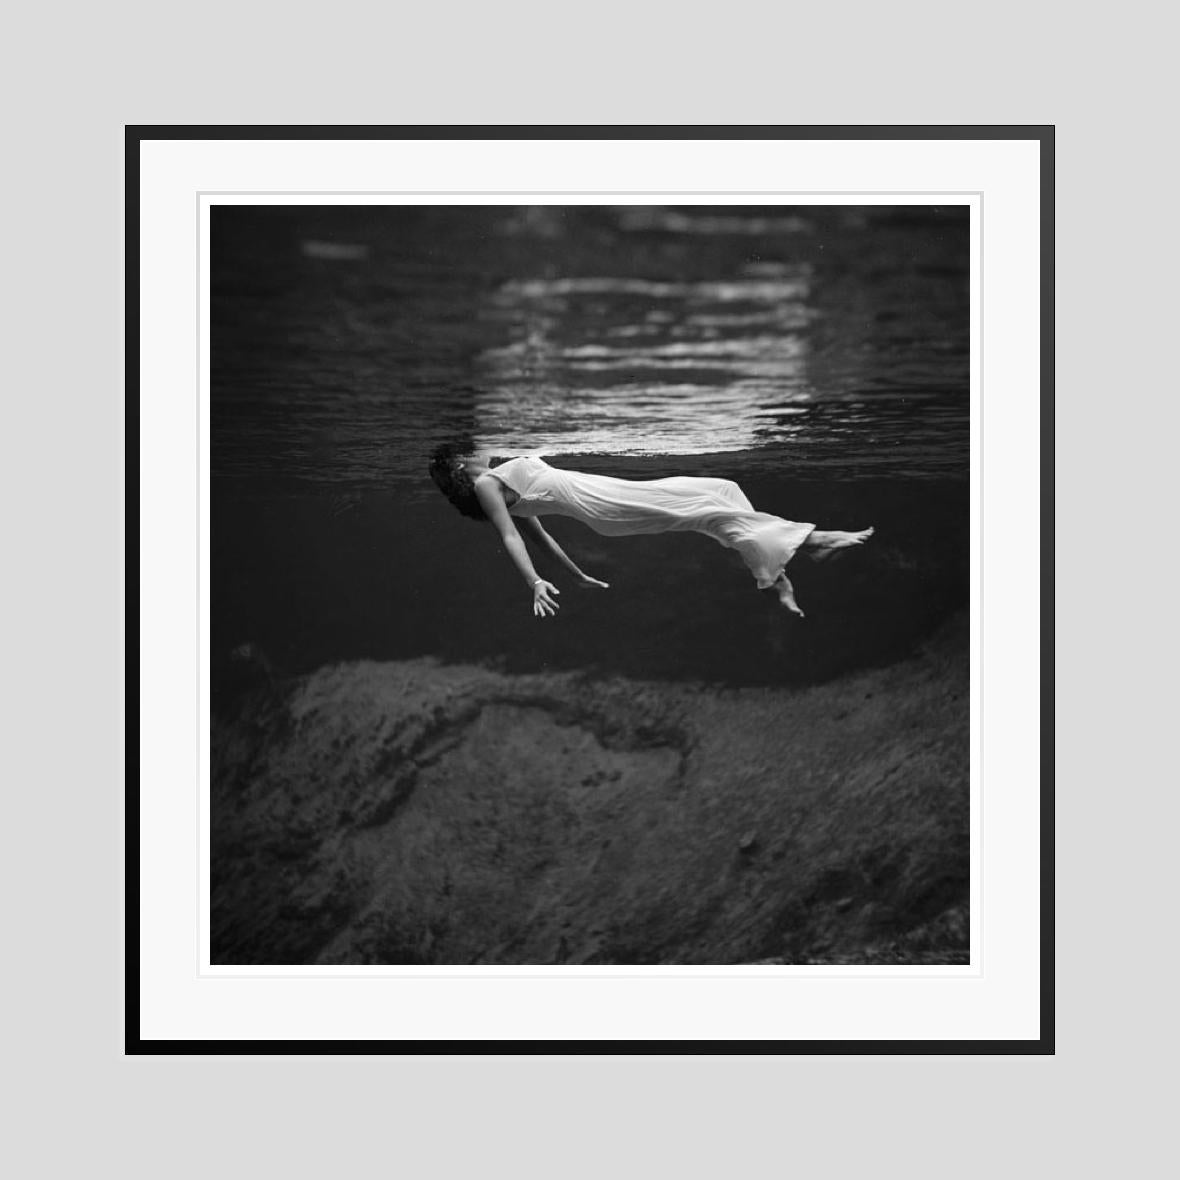 Floating

1947

A model floats in an evening dress, shot from underwater
by Toni Frissell

30 x 30